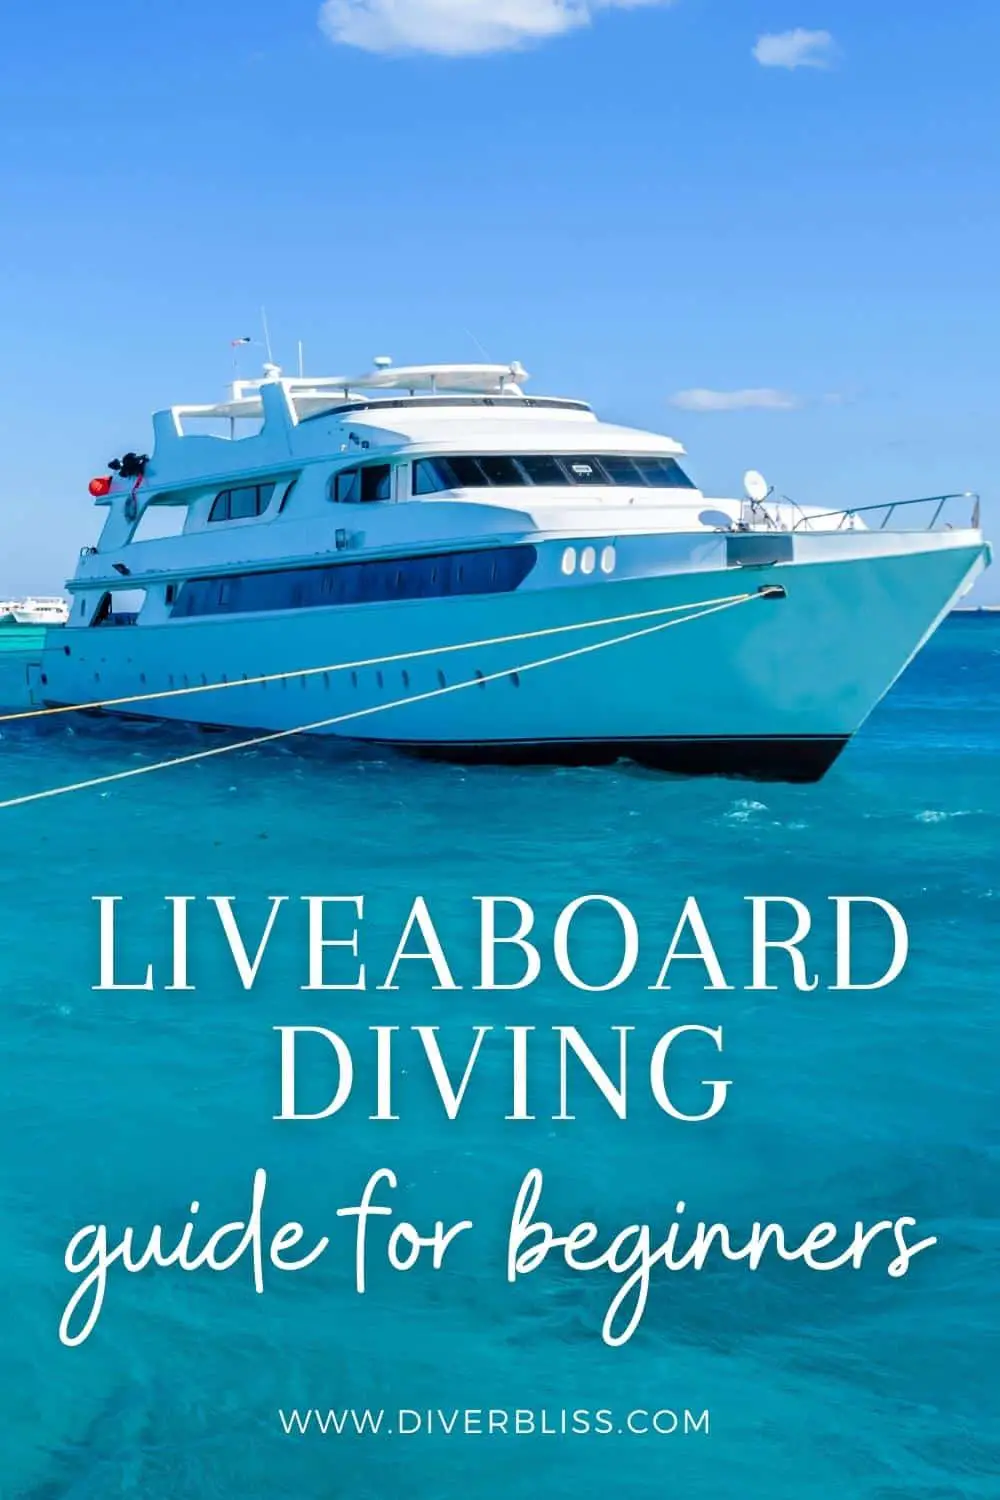 liveaboard diving guide for beginners